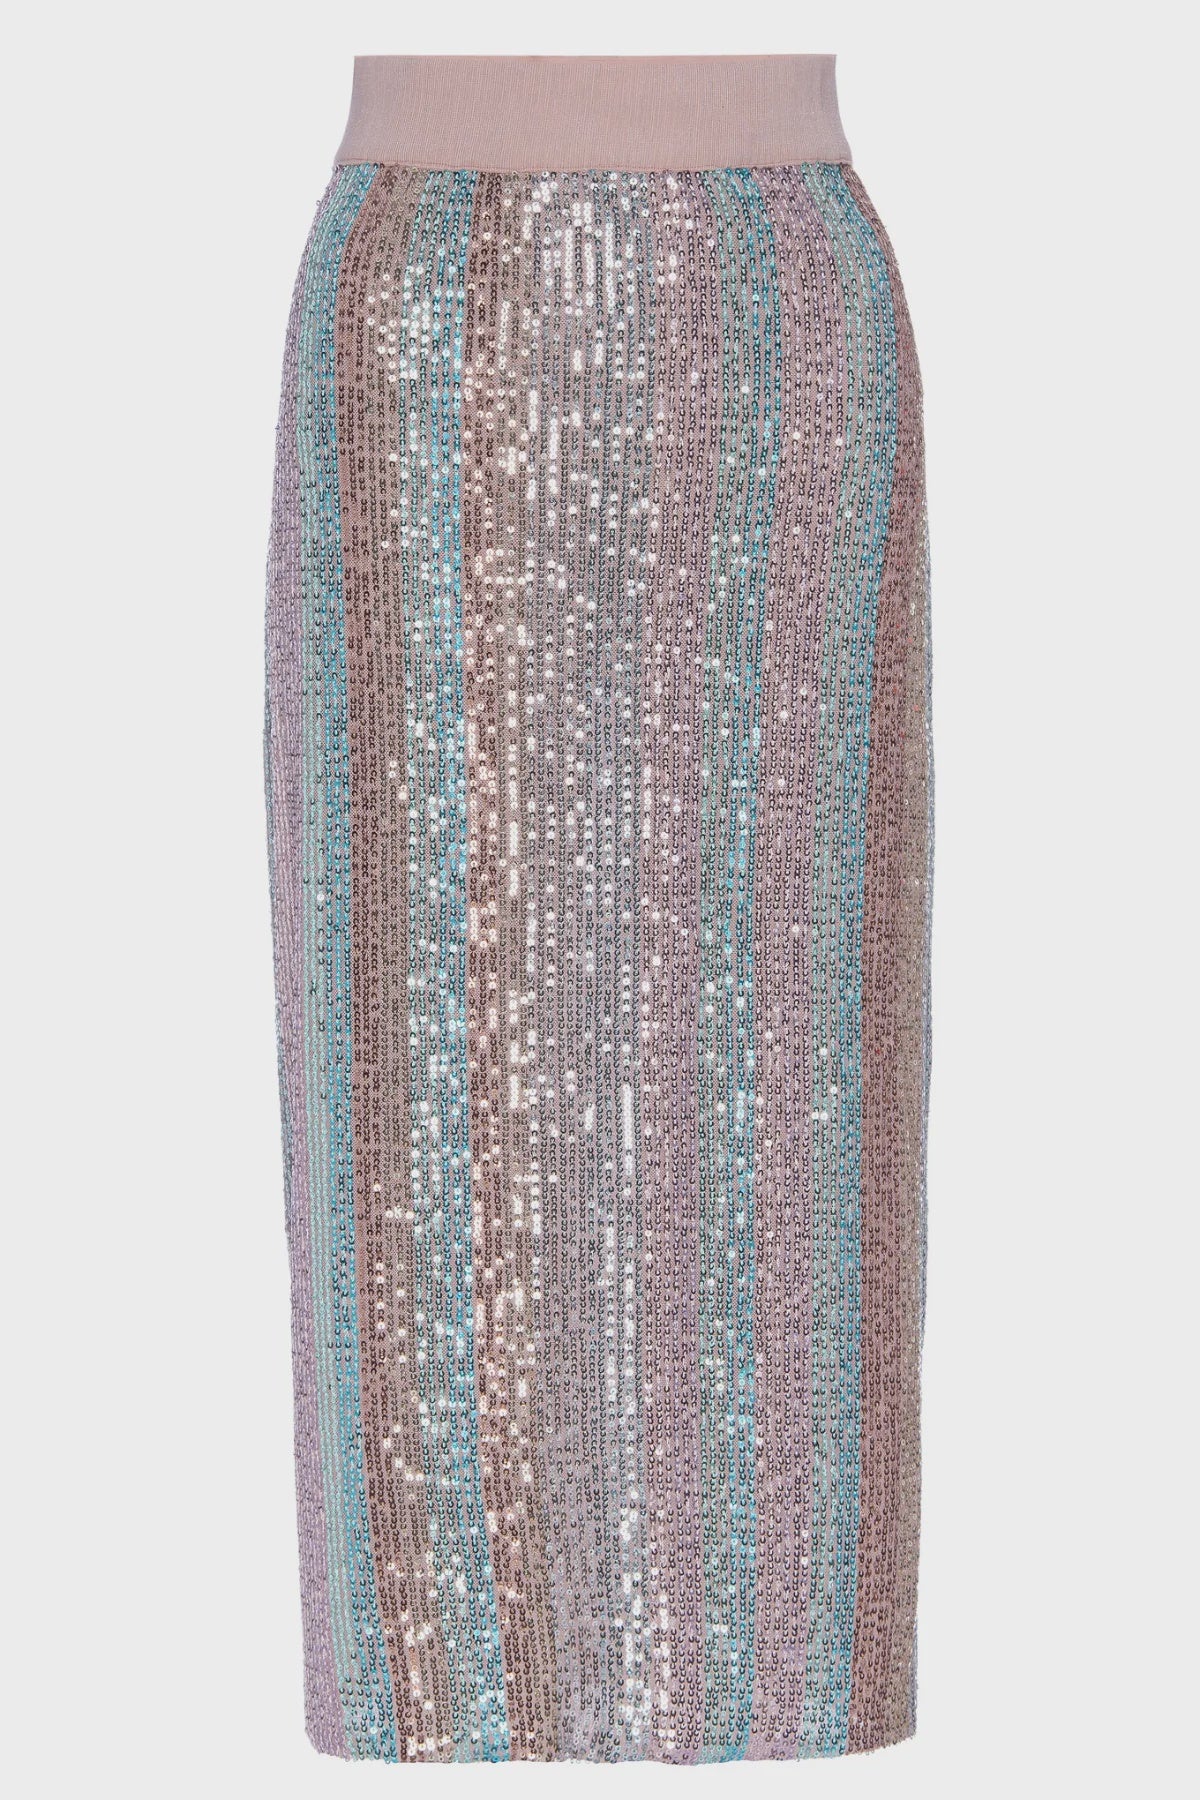 A colorful sequined Liza skirt with vertical stripes in shades of silver, pink, and teal, suitable for a fashion display in a Scottsdale Arizona bungalow by Le Superbe.